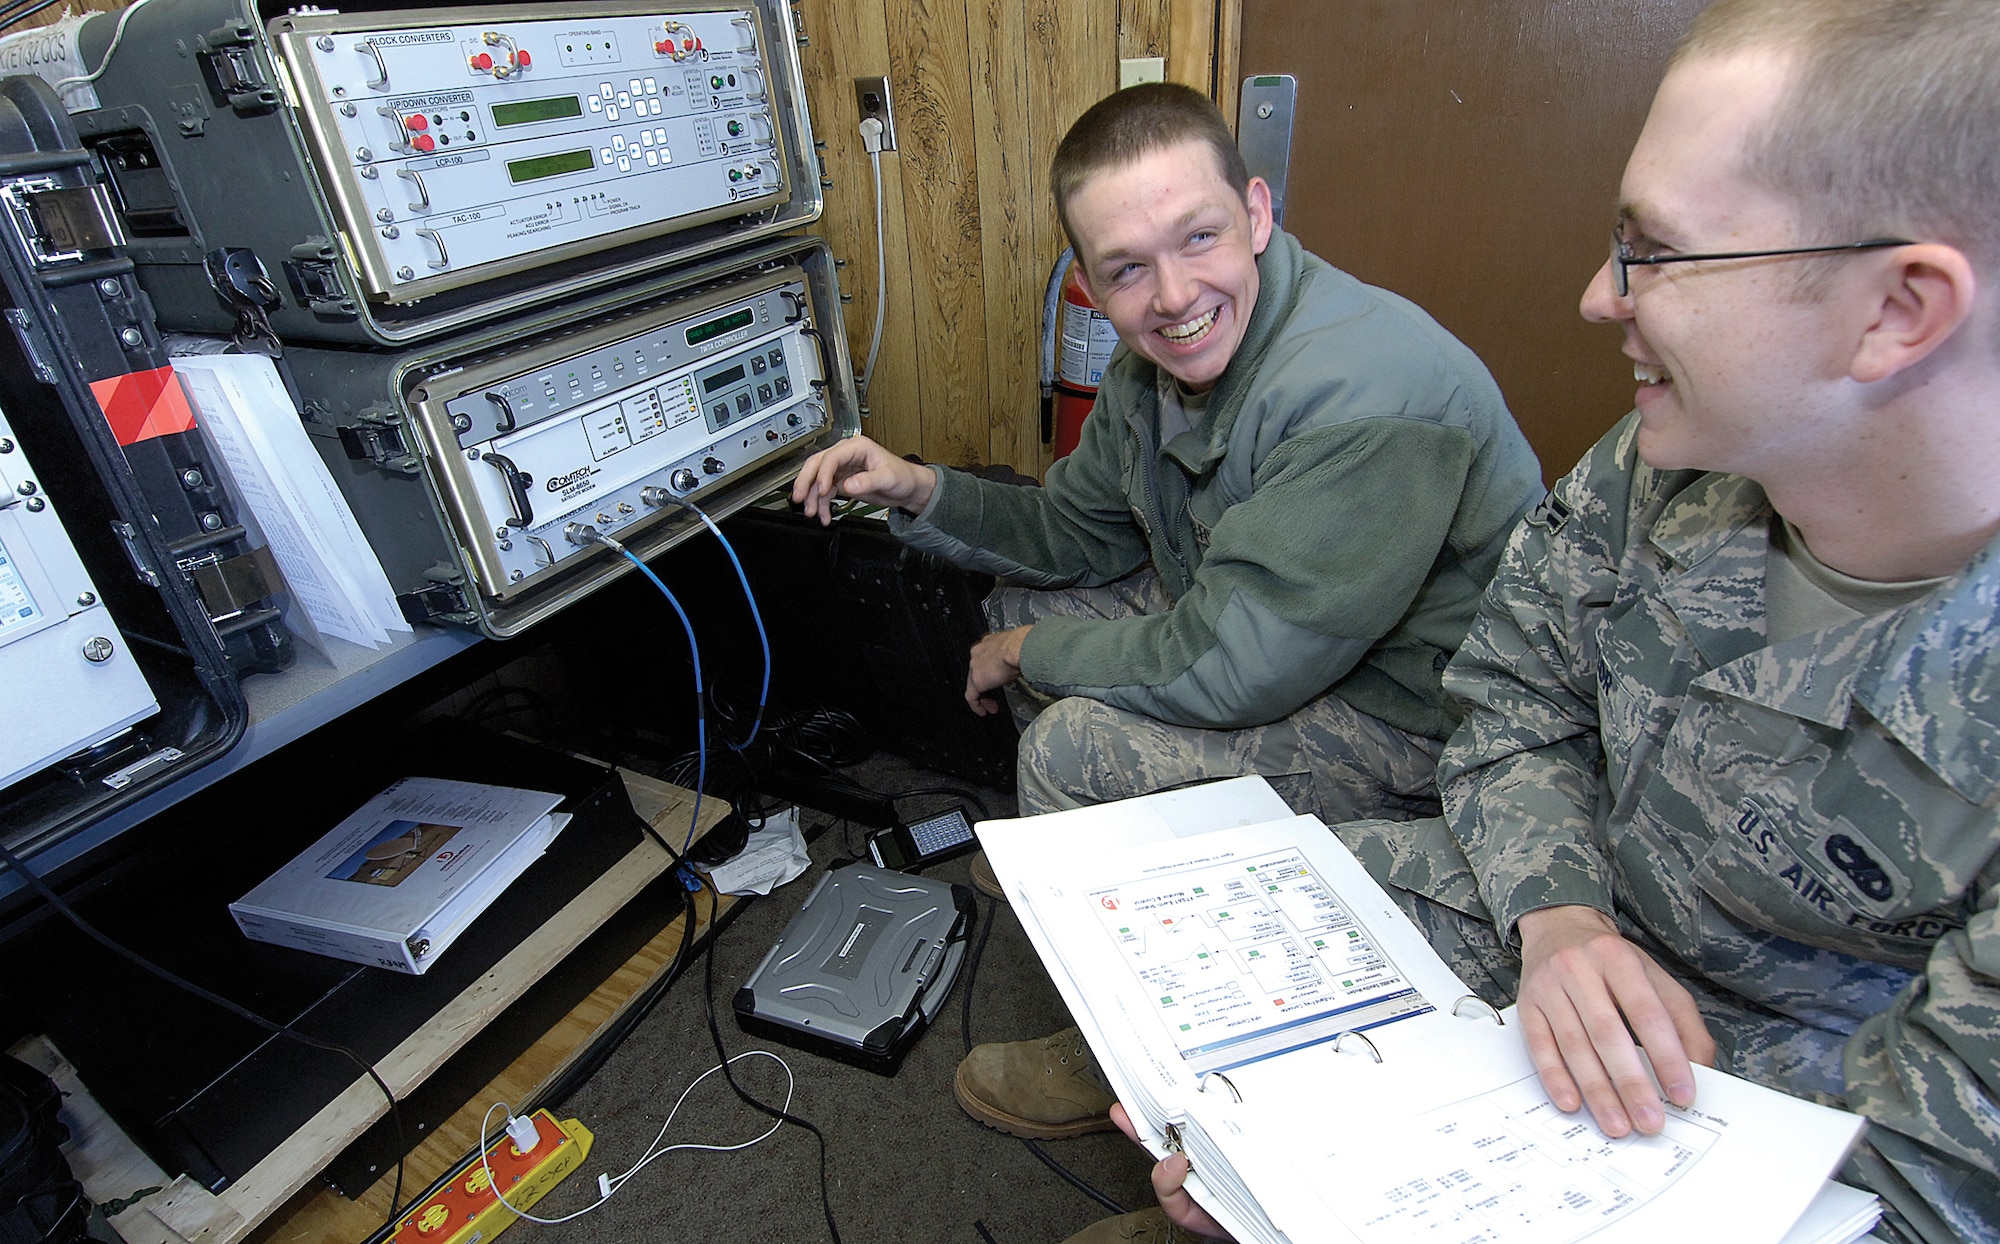 Exercises, war and areas hit by disaster need communications and members of the 3rd Combat Communications Group meet those challenges as a way of life. Airmen 1st Class Daniel Swann, left, and Zachary Taylor enjoy a quick joke while they test satellite communications equipment before it’s packed for an exercise at Minot, N.D. (Air Force photo by Margo Wright)